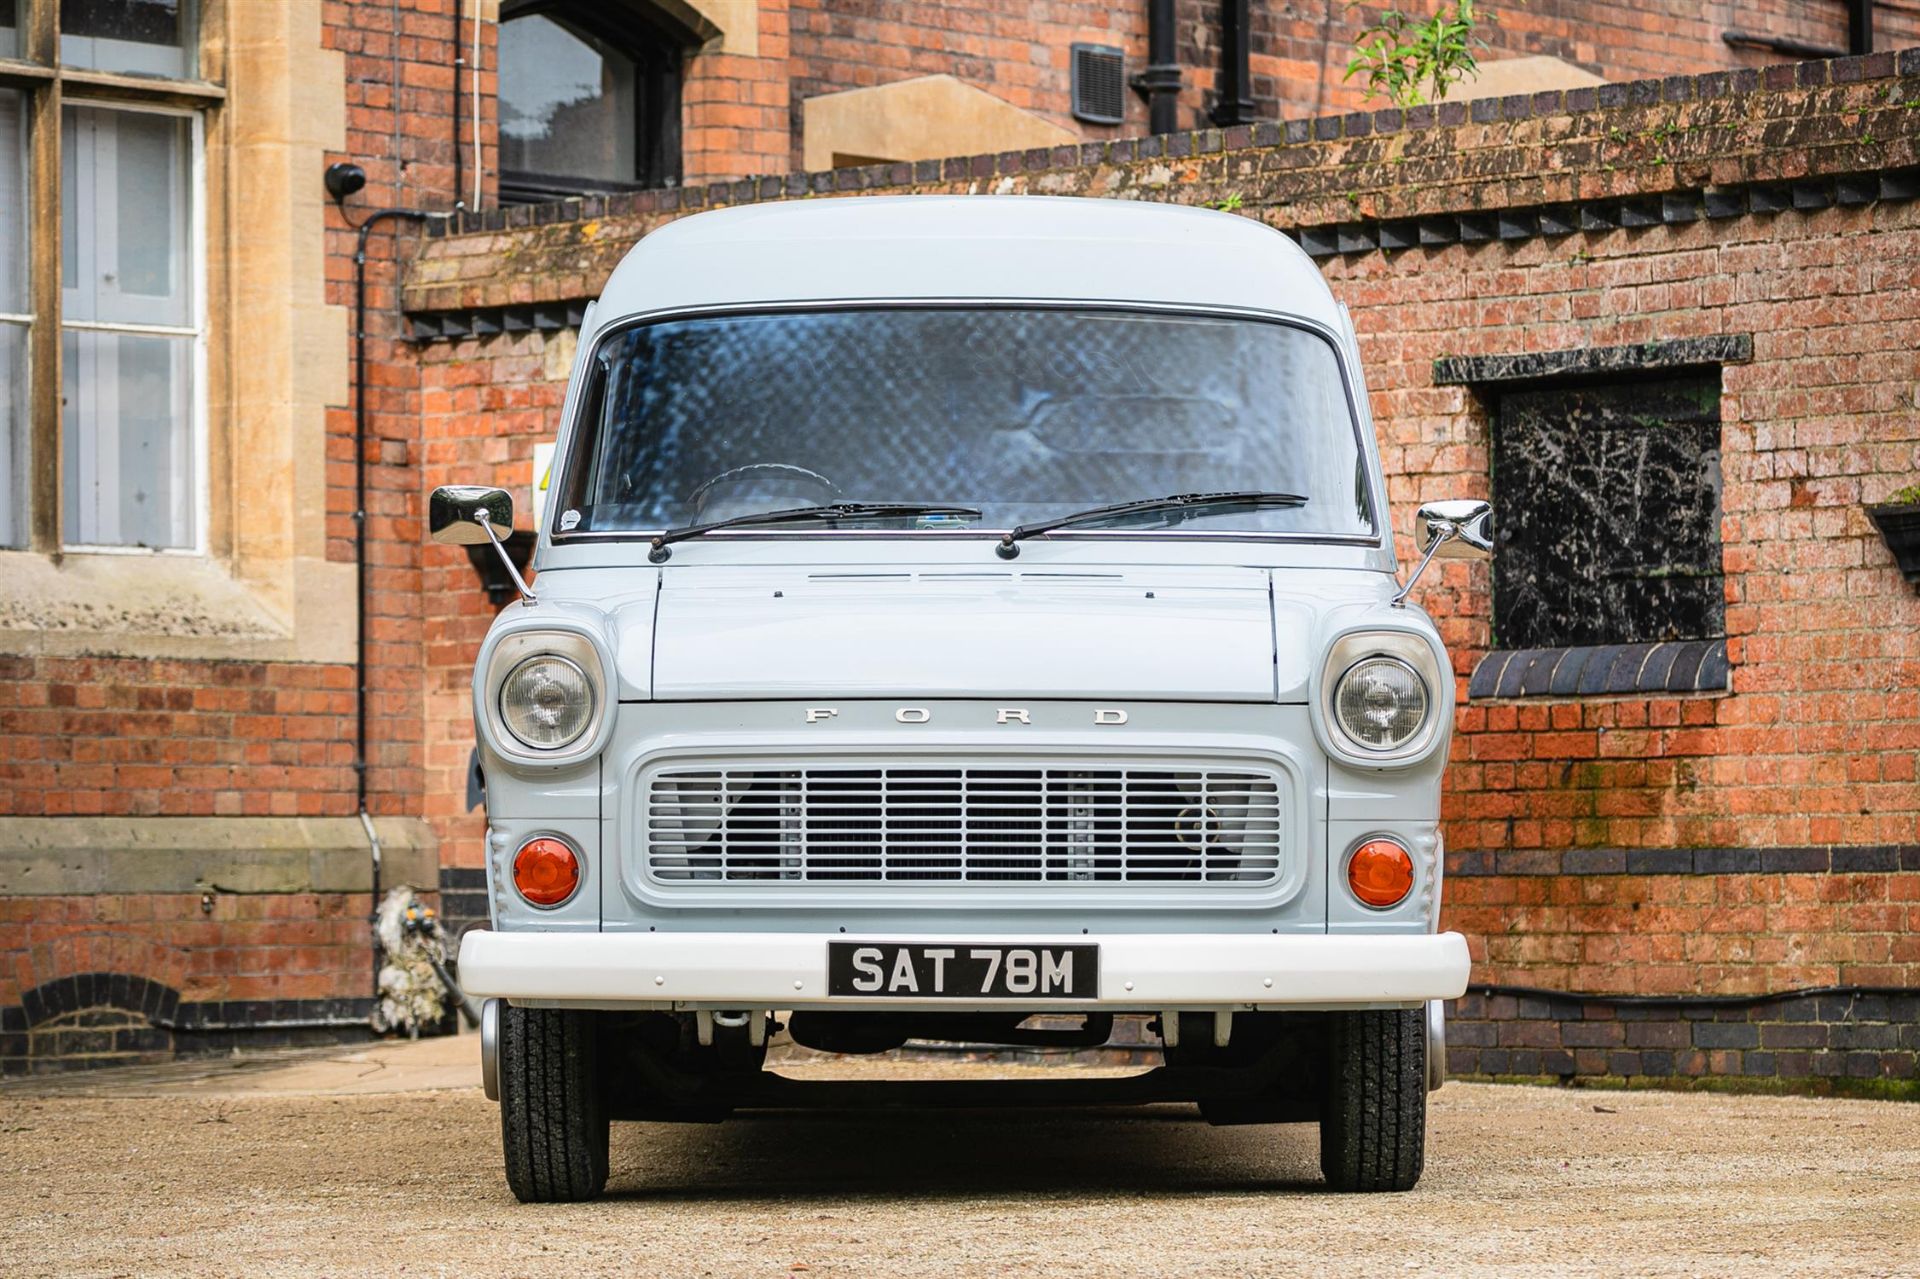 1974 Ford Transit Mk1 LWB Twin Wheel - Ex-Wheeler Dealers - Offered Directly From Mike Brewer - Image 6 of 10